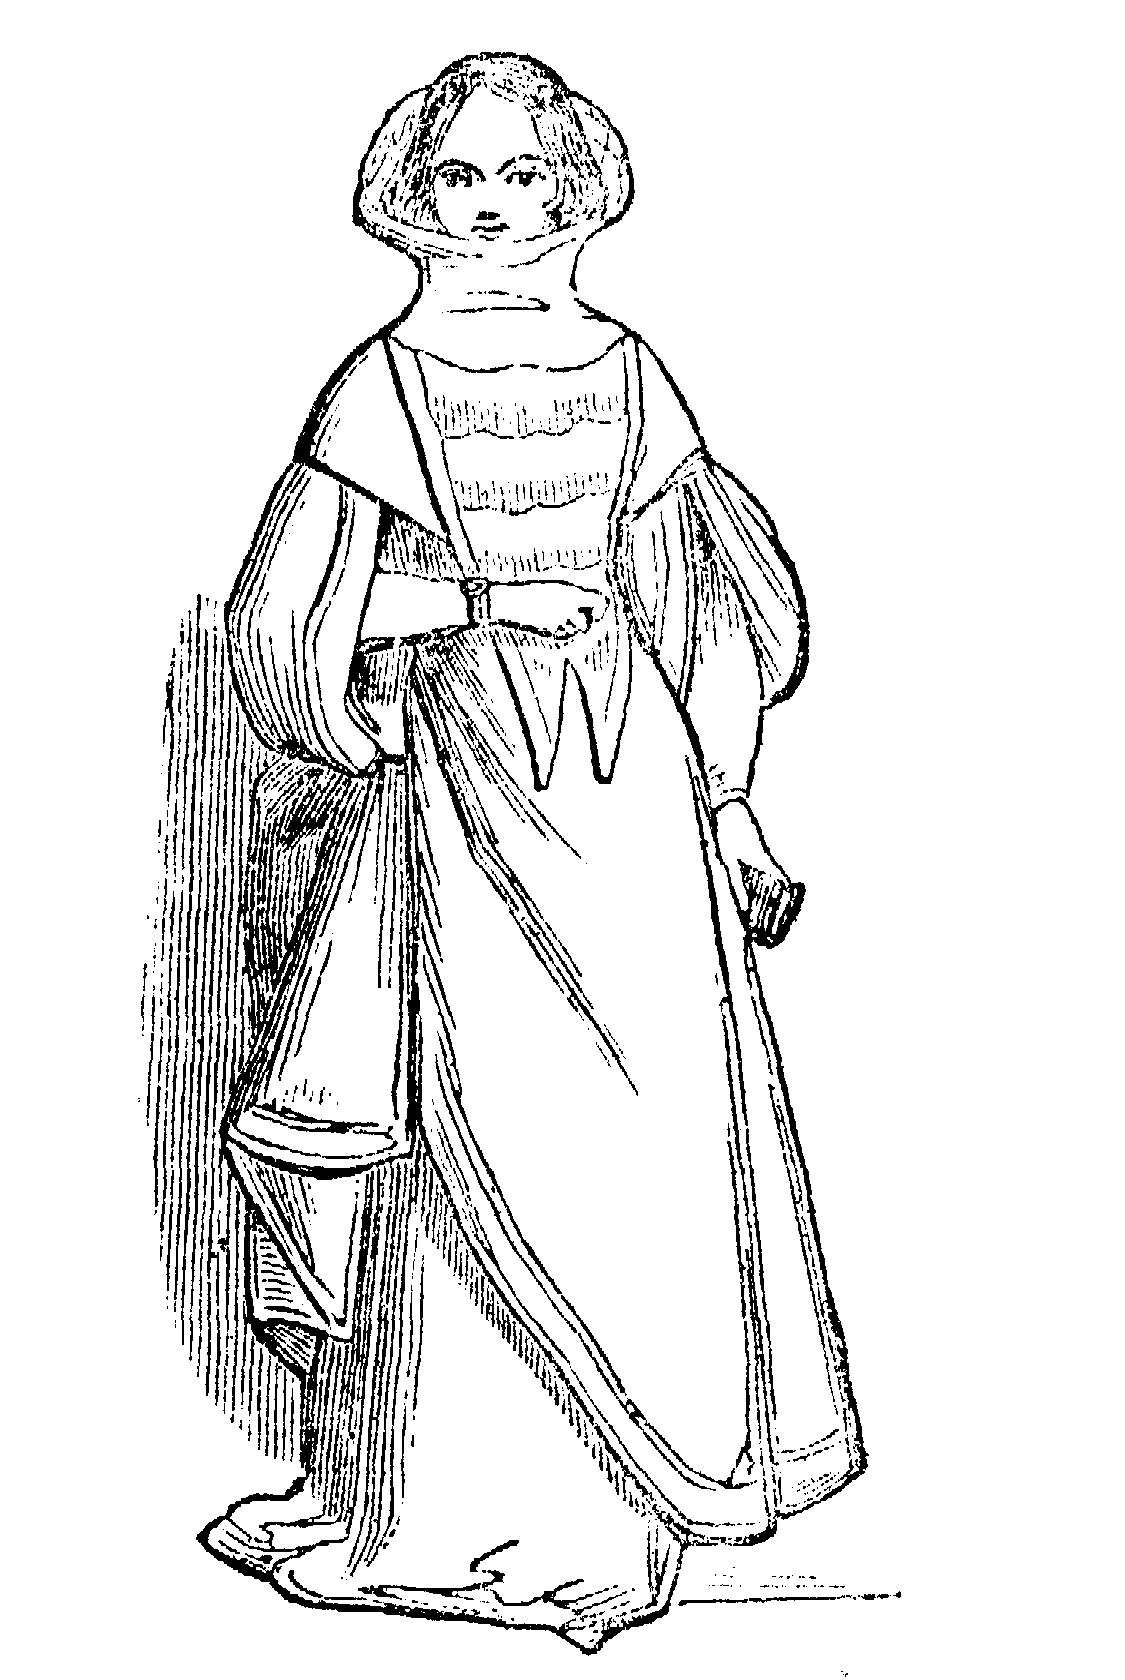 Costume from about 1300